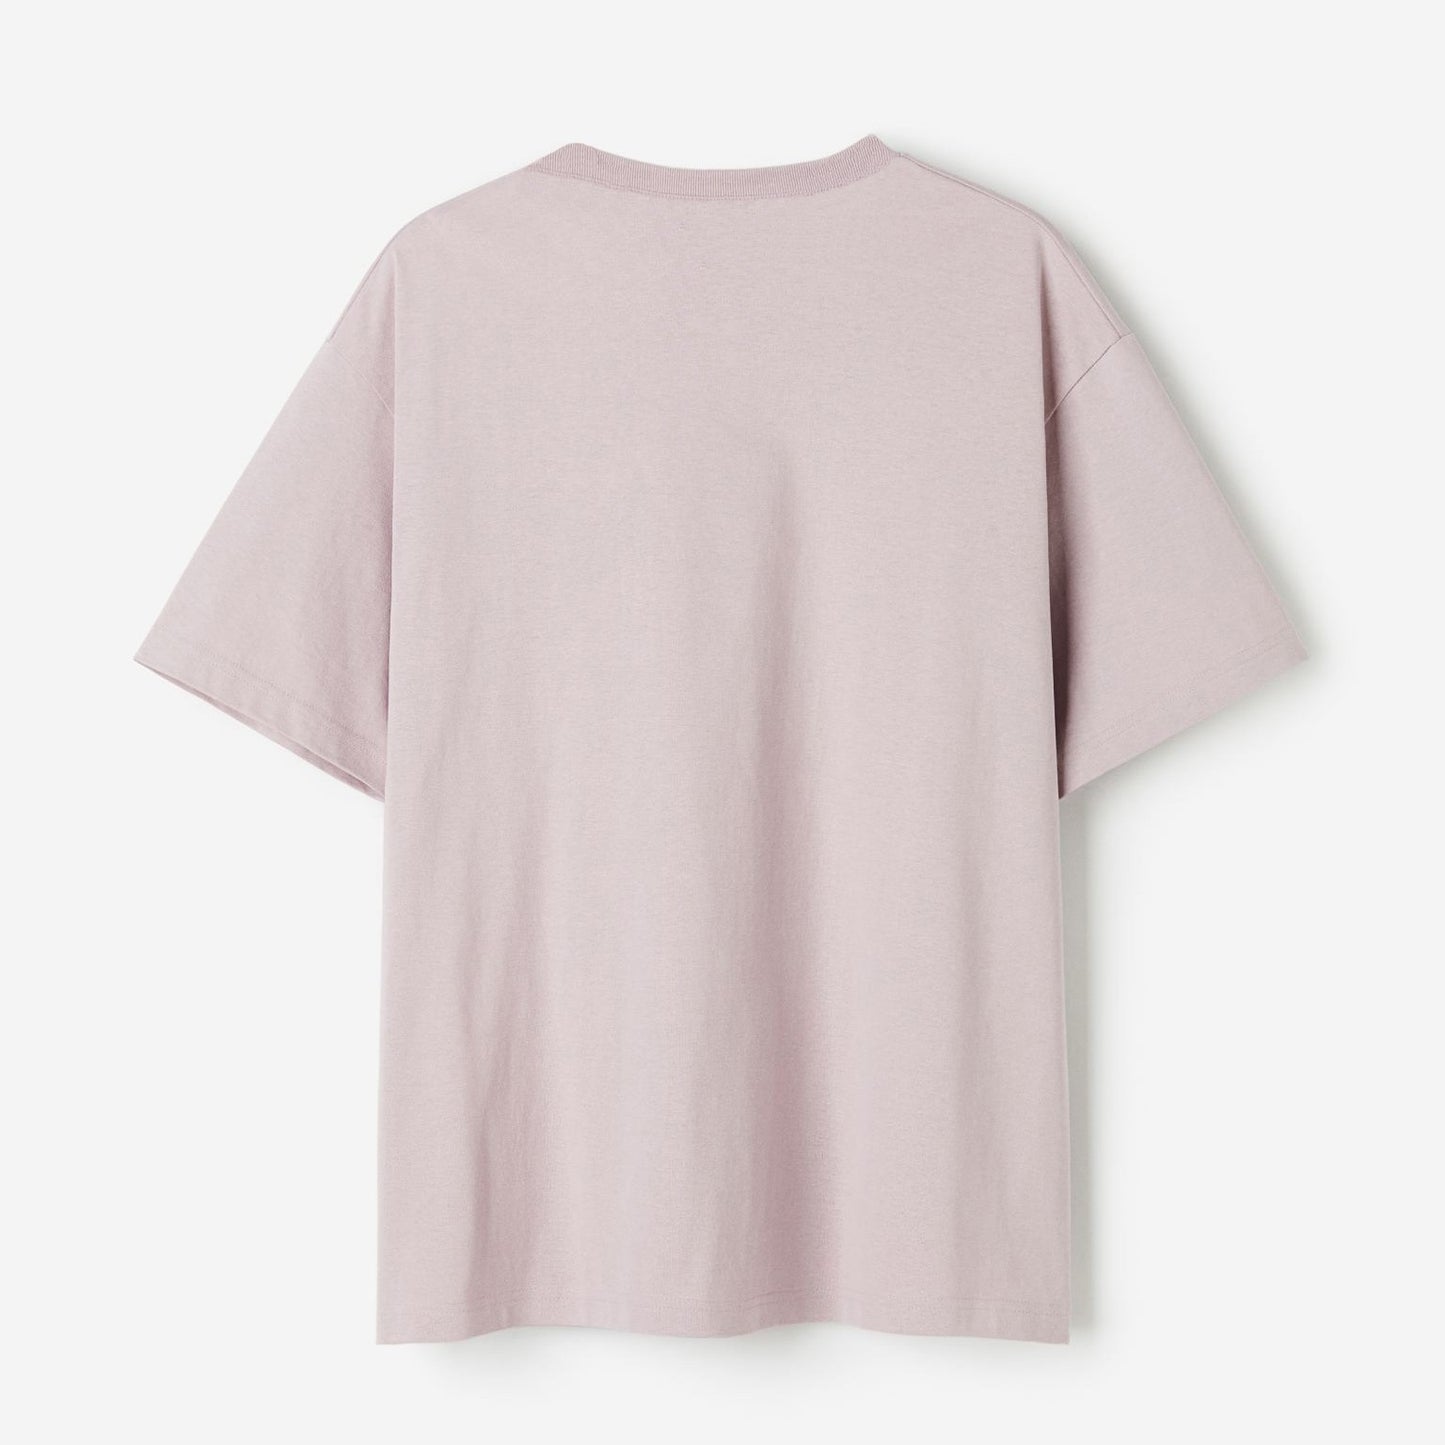 Take It Easy Printed Oversized Lavender Cotton T-shirt